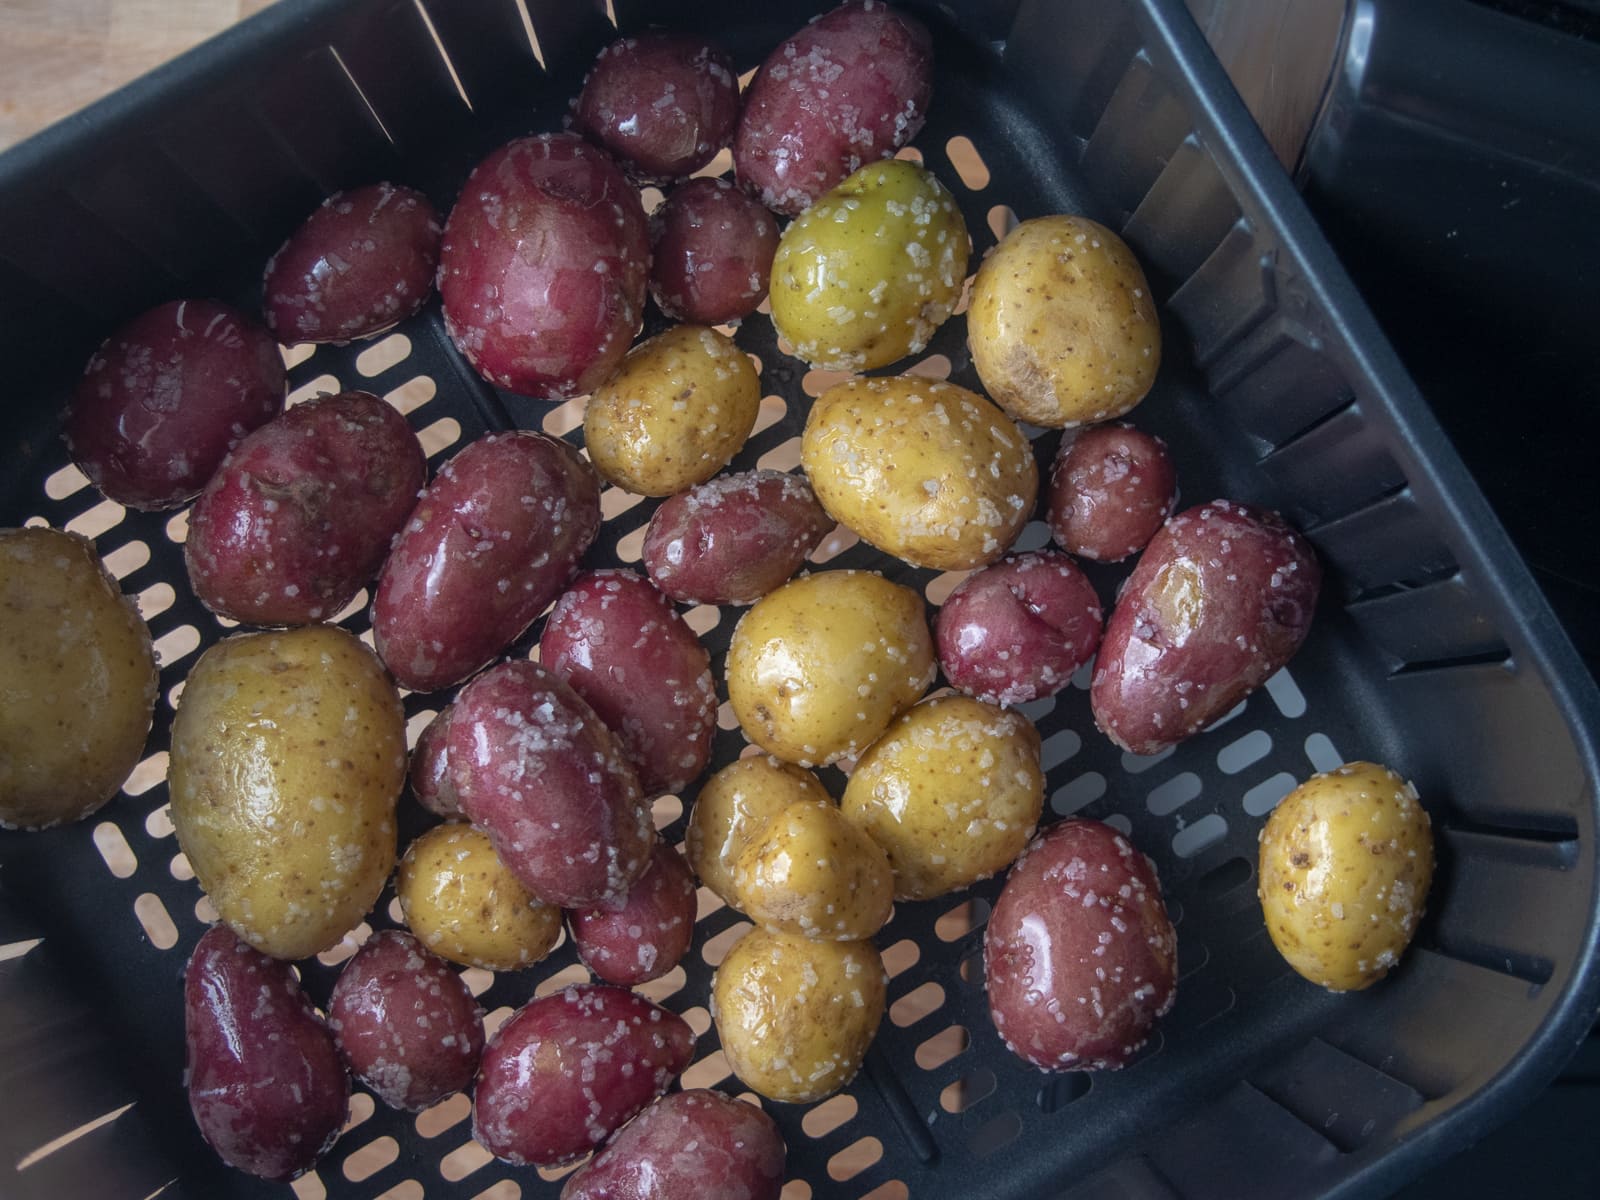 Top view of a plate of yellow and purple baby potatoes with salt.